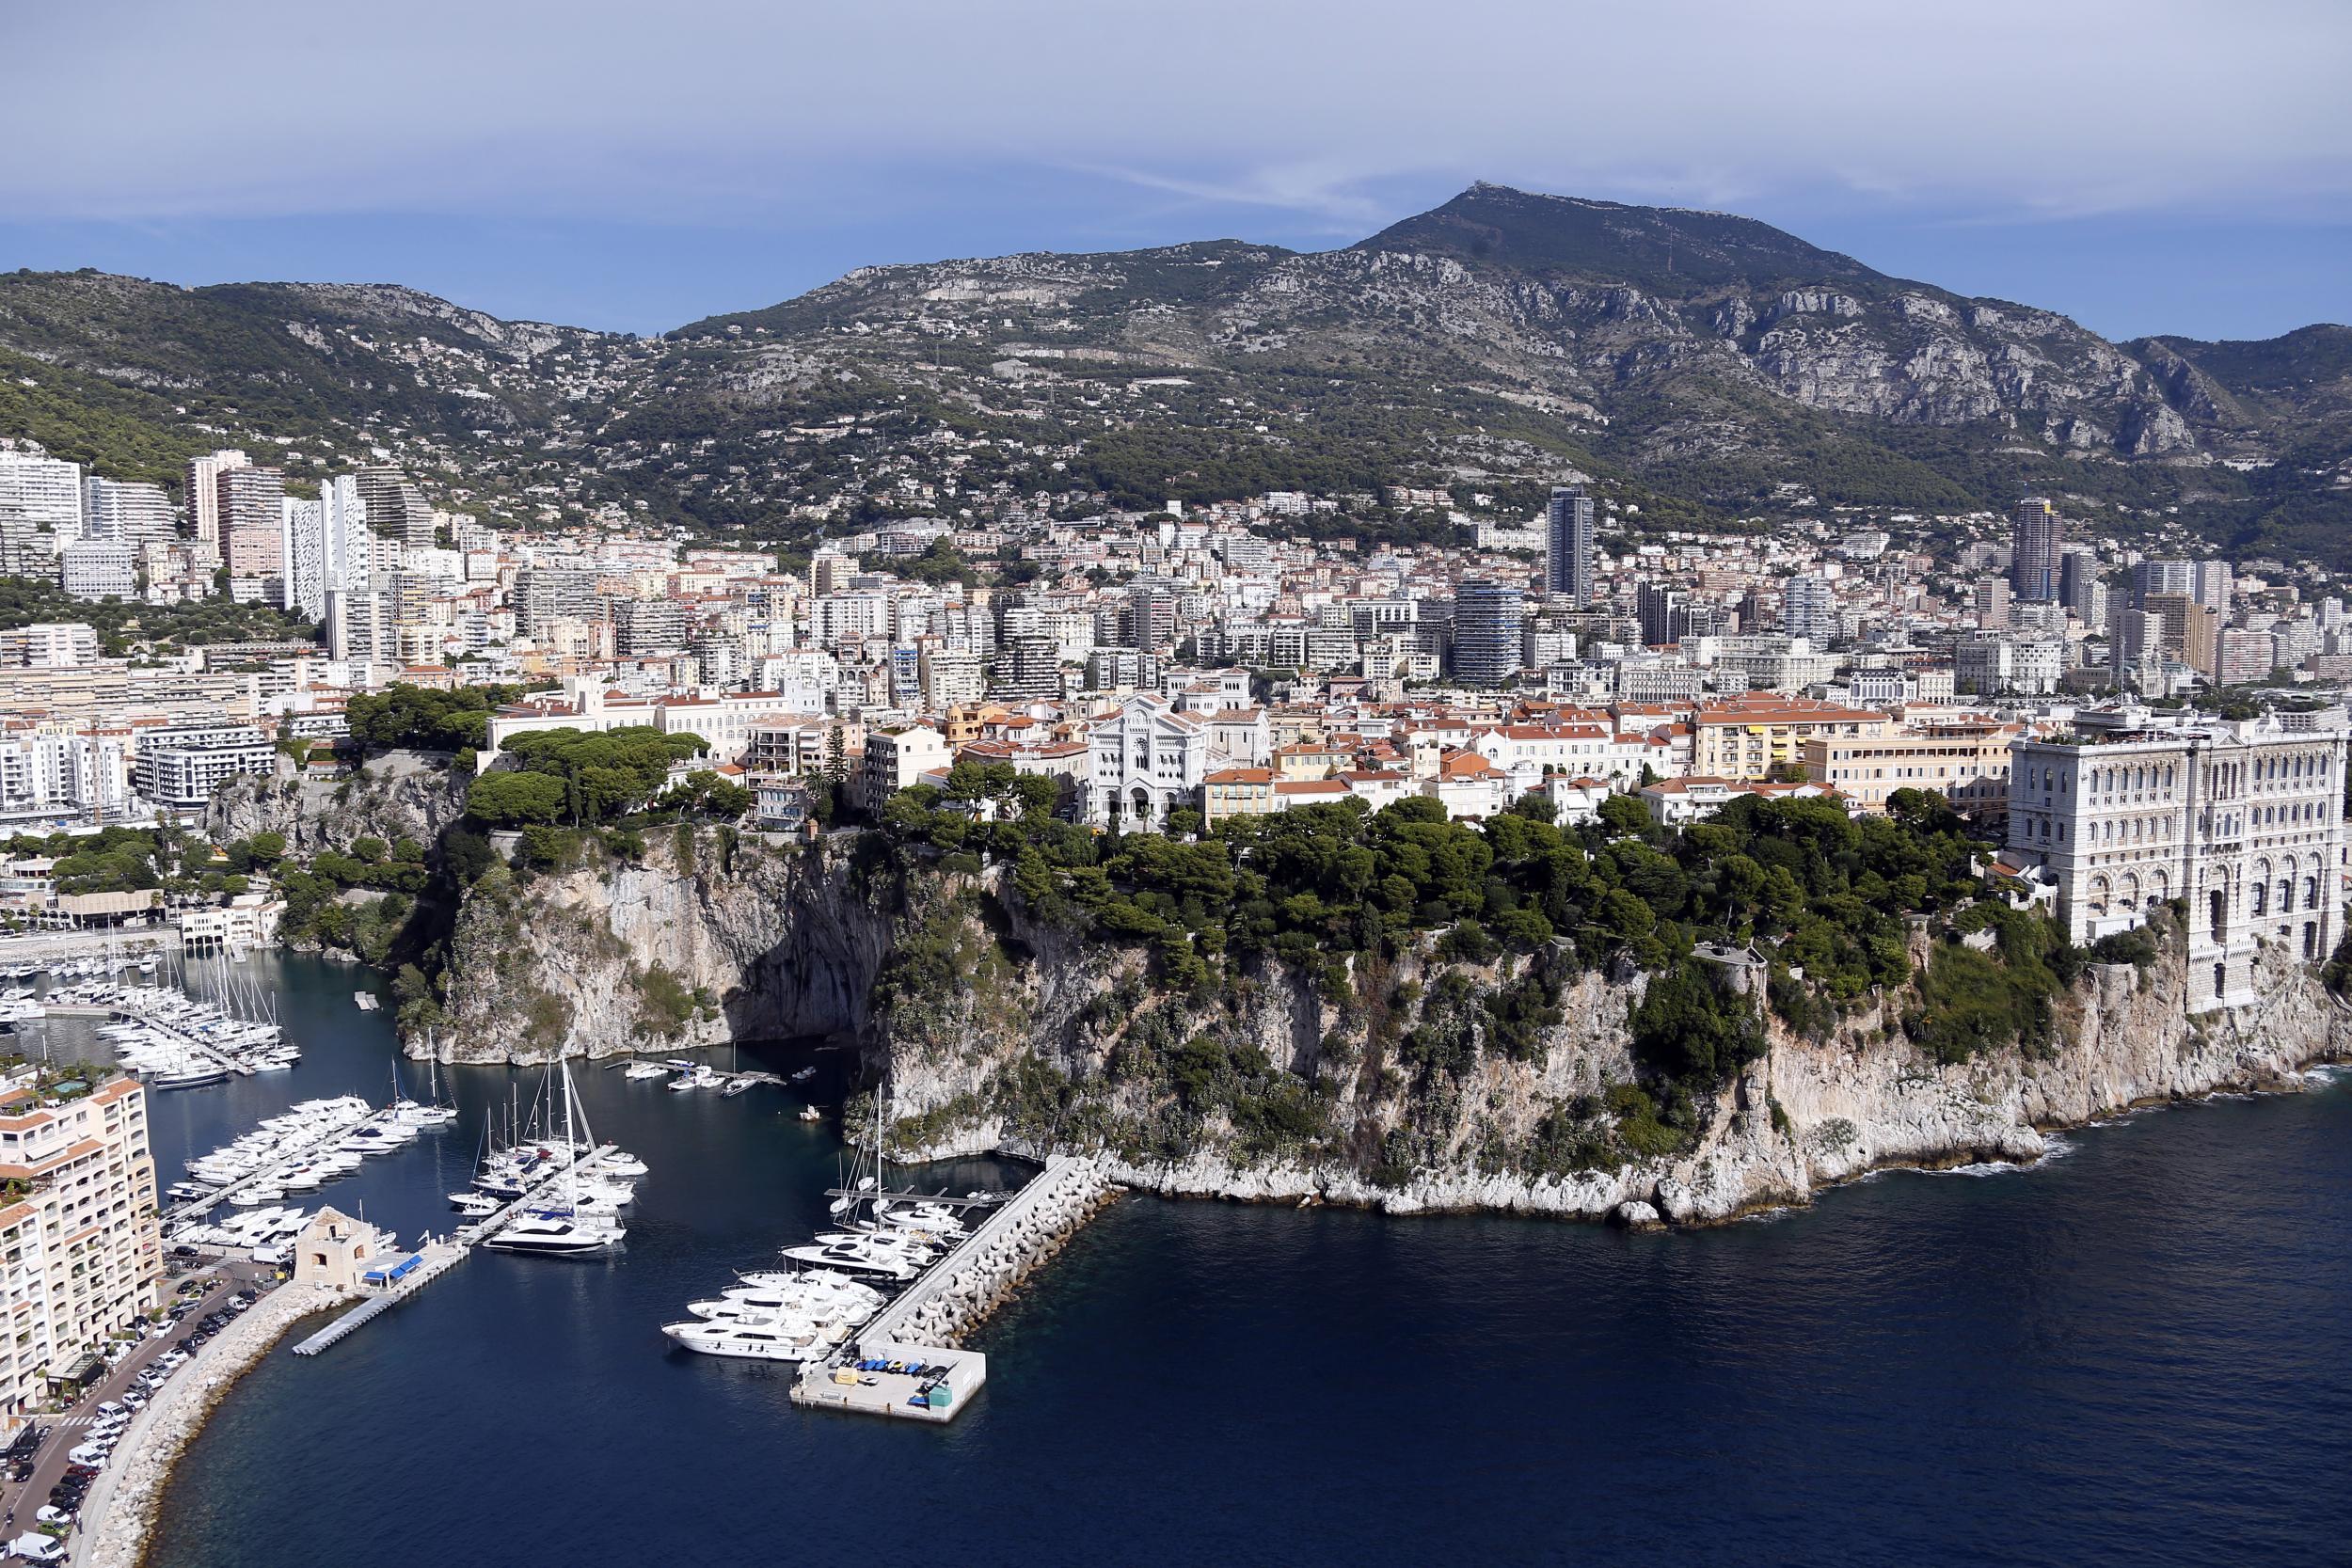 Monaco: not the loveliest spot between France and Italy